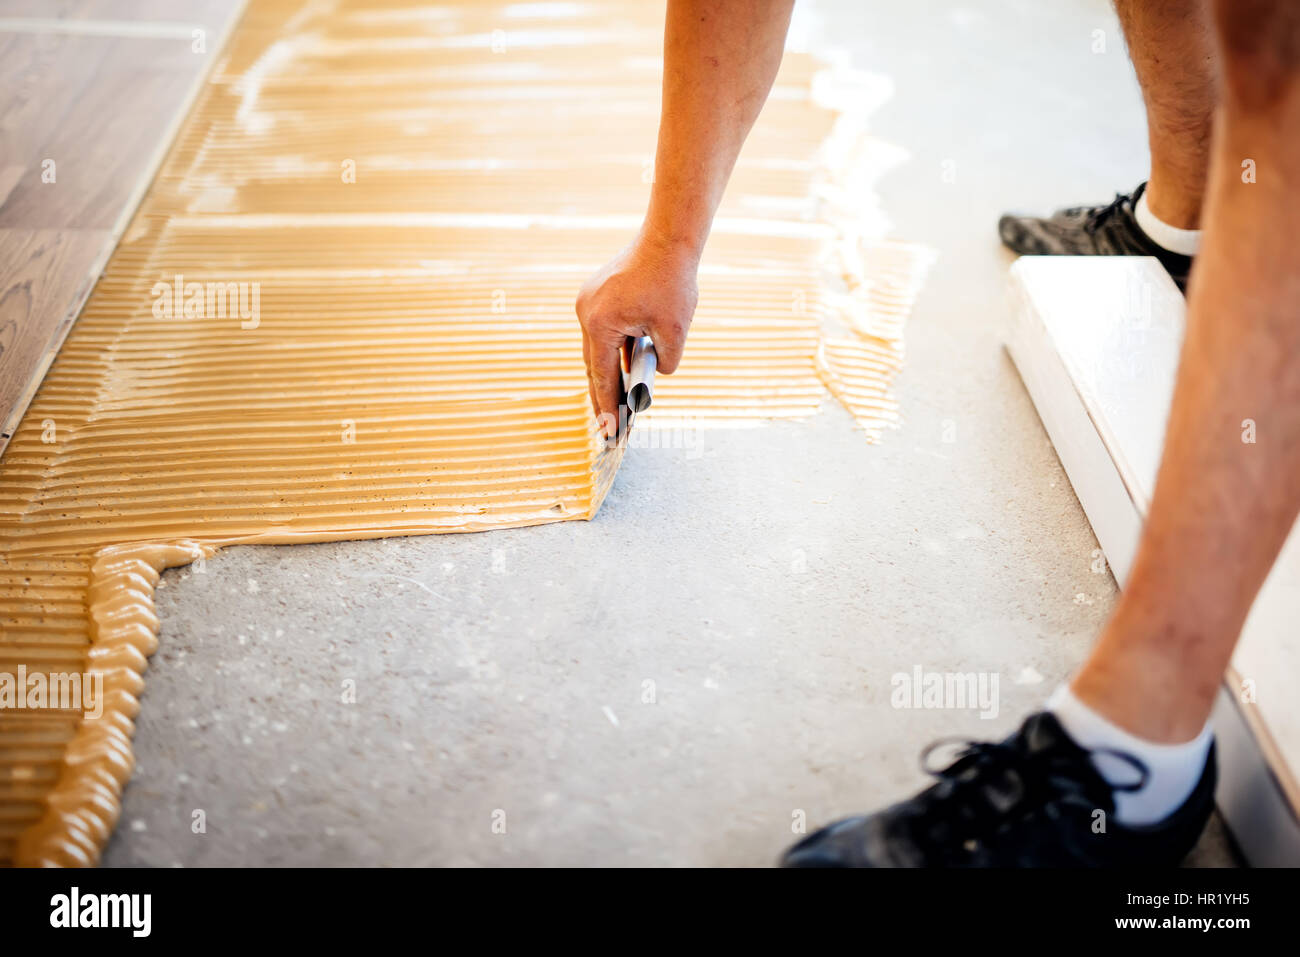 industrial worker adding glue on cement floor, preparing surface for wood parquet Stock Photo